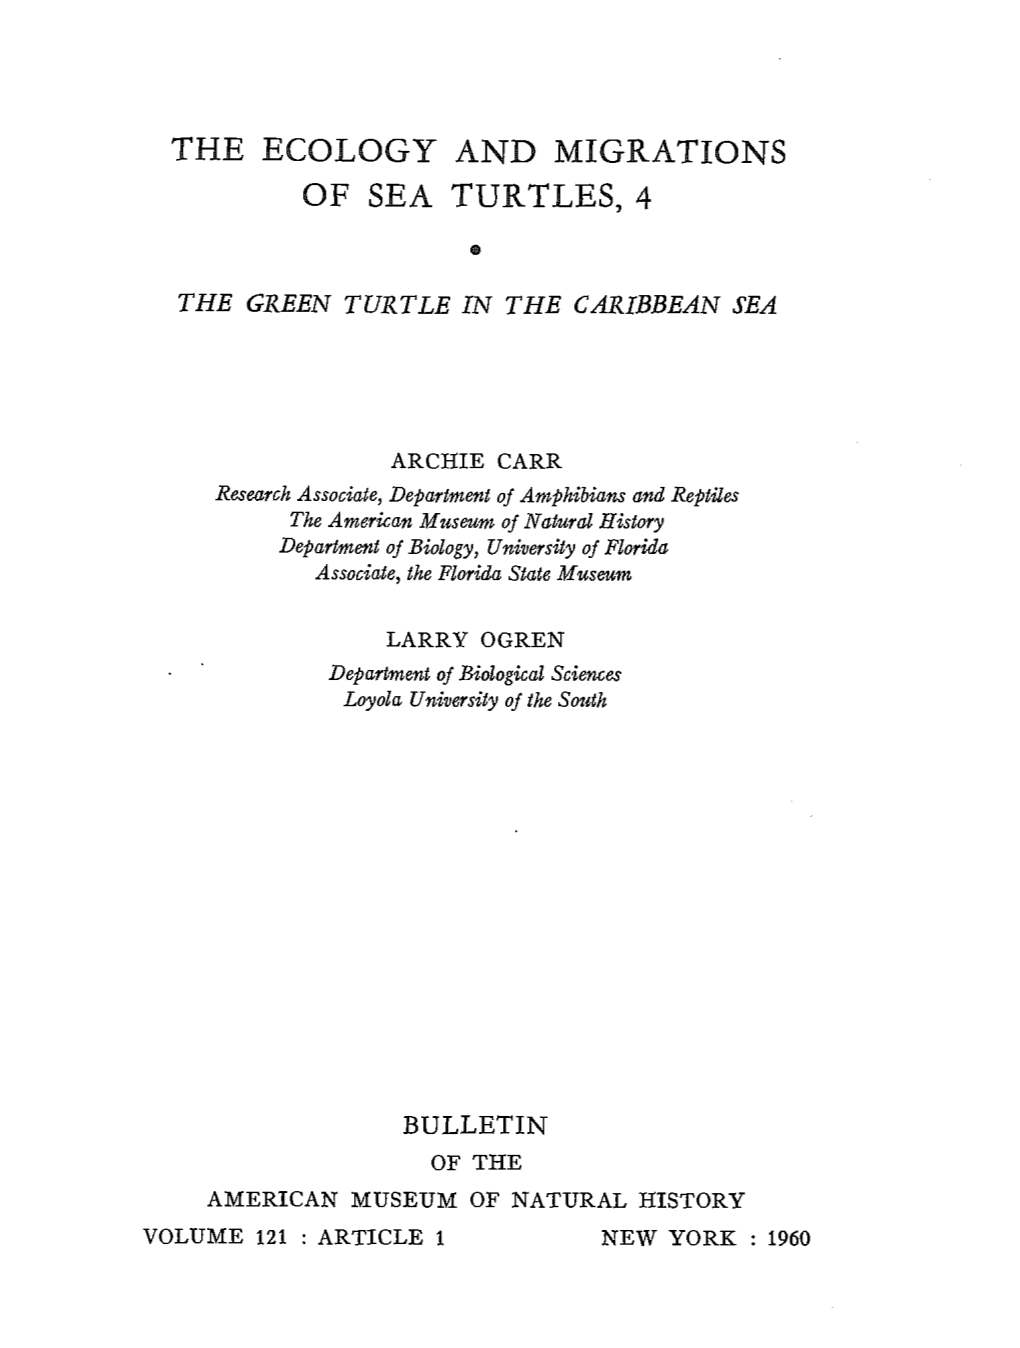 The Ecology and Migrations of Sea Turtles, 4